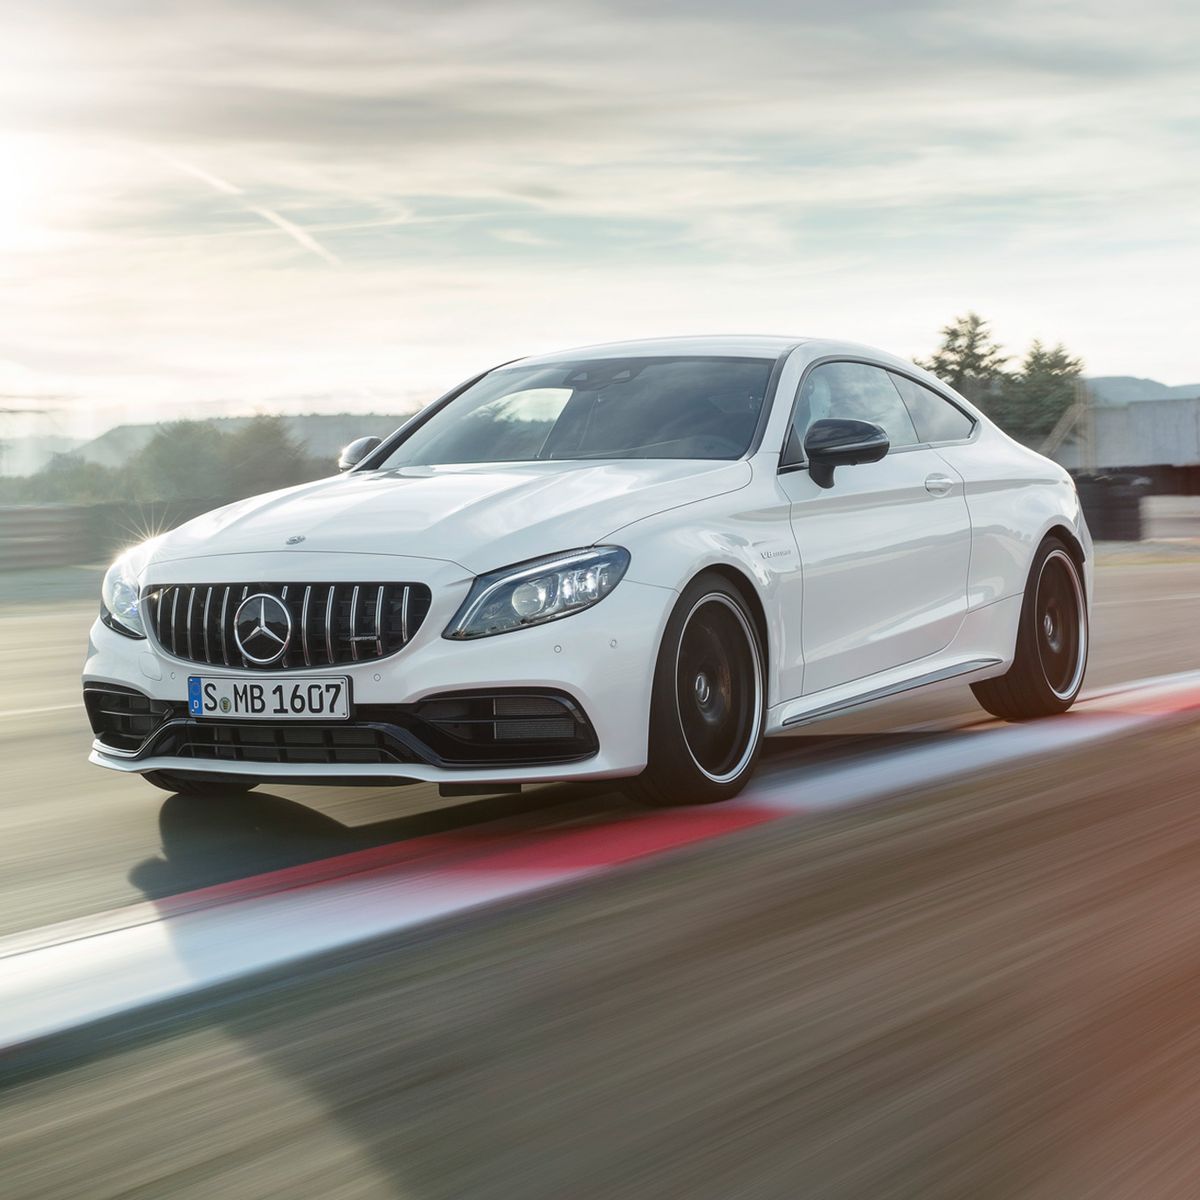 2019 Mercedes-AMG C63 Sedan, Coupe, and Cabriolet Photos and Info, News